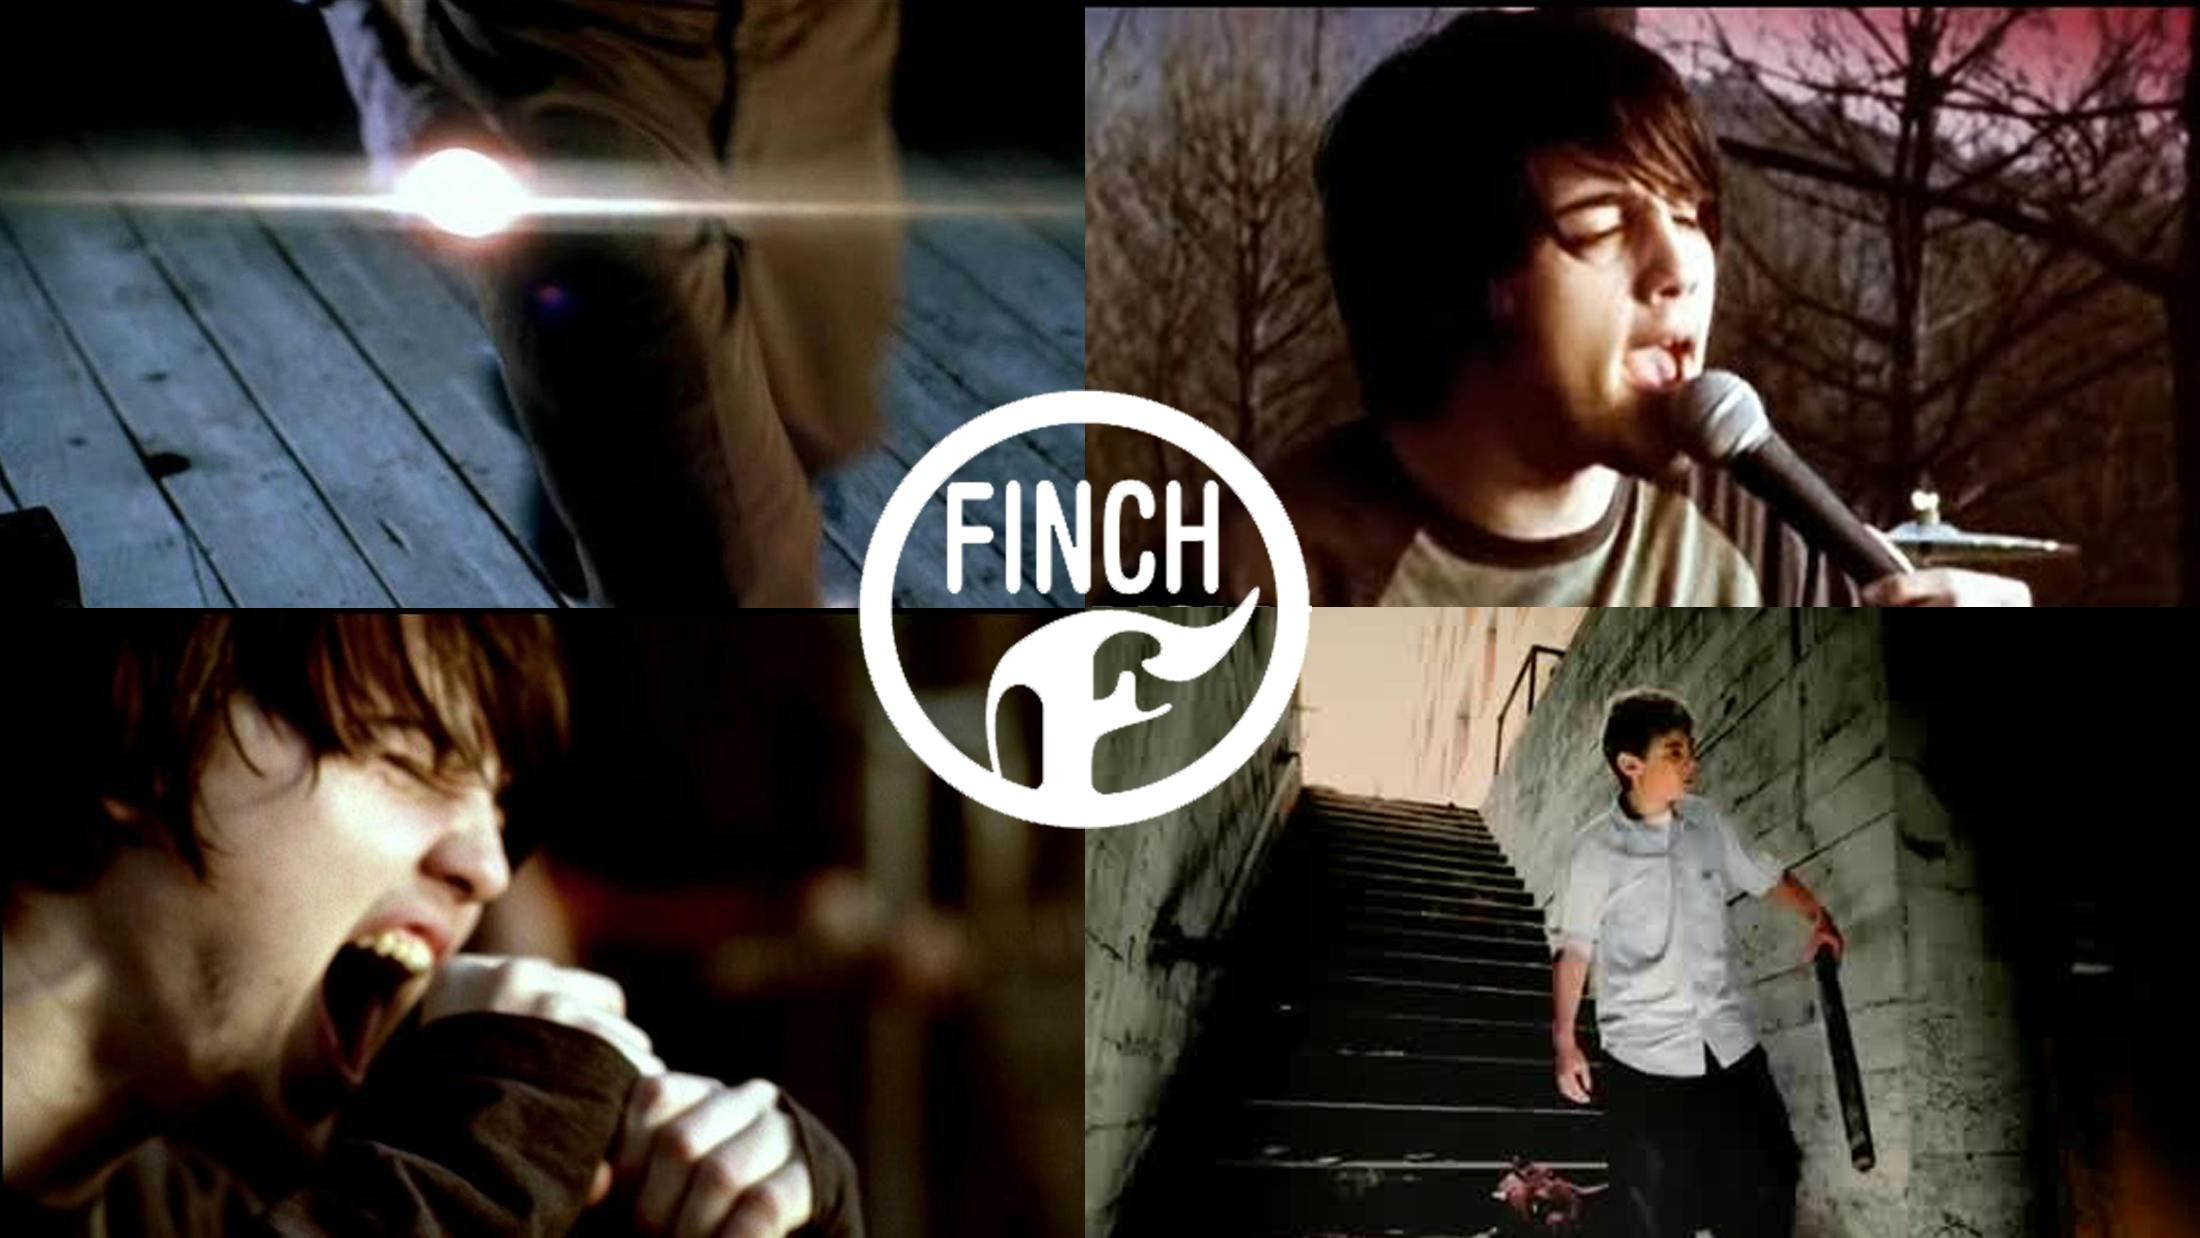 A Deep Dive Into Finch’s Video For Letters To You